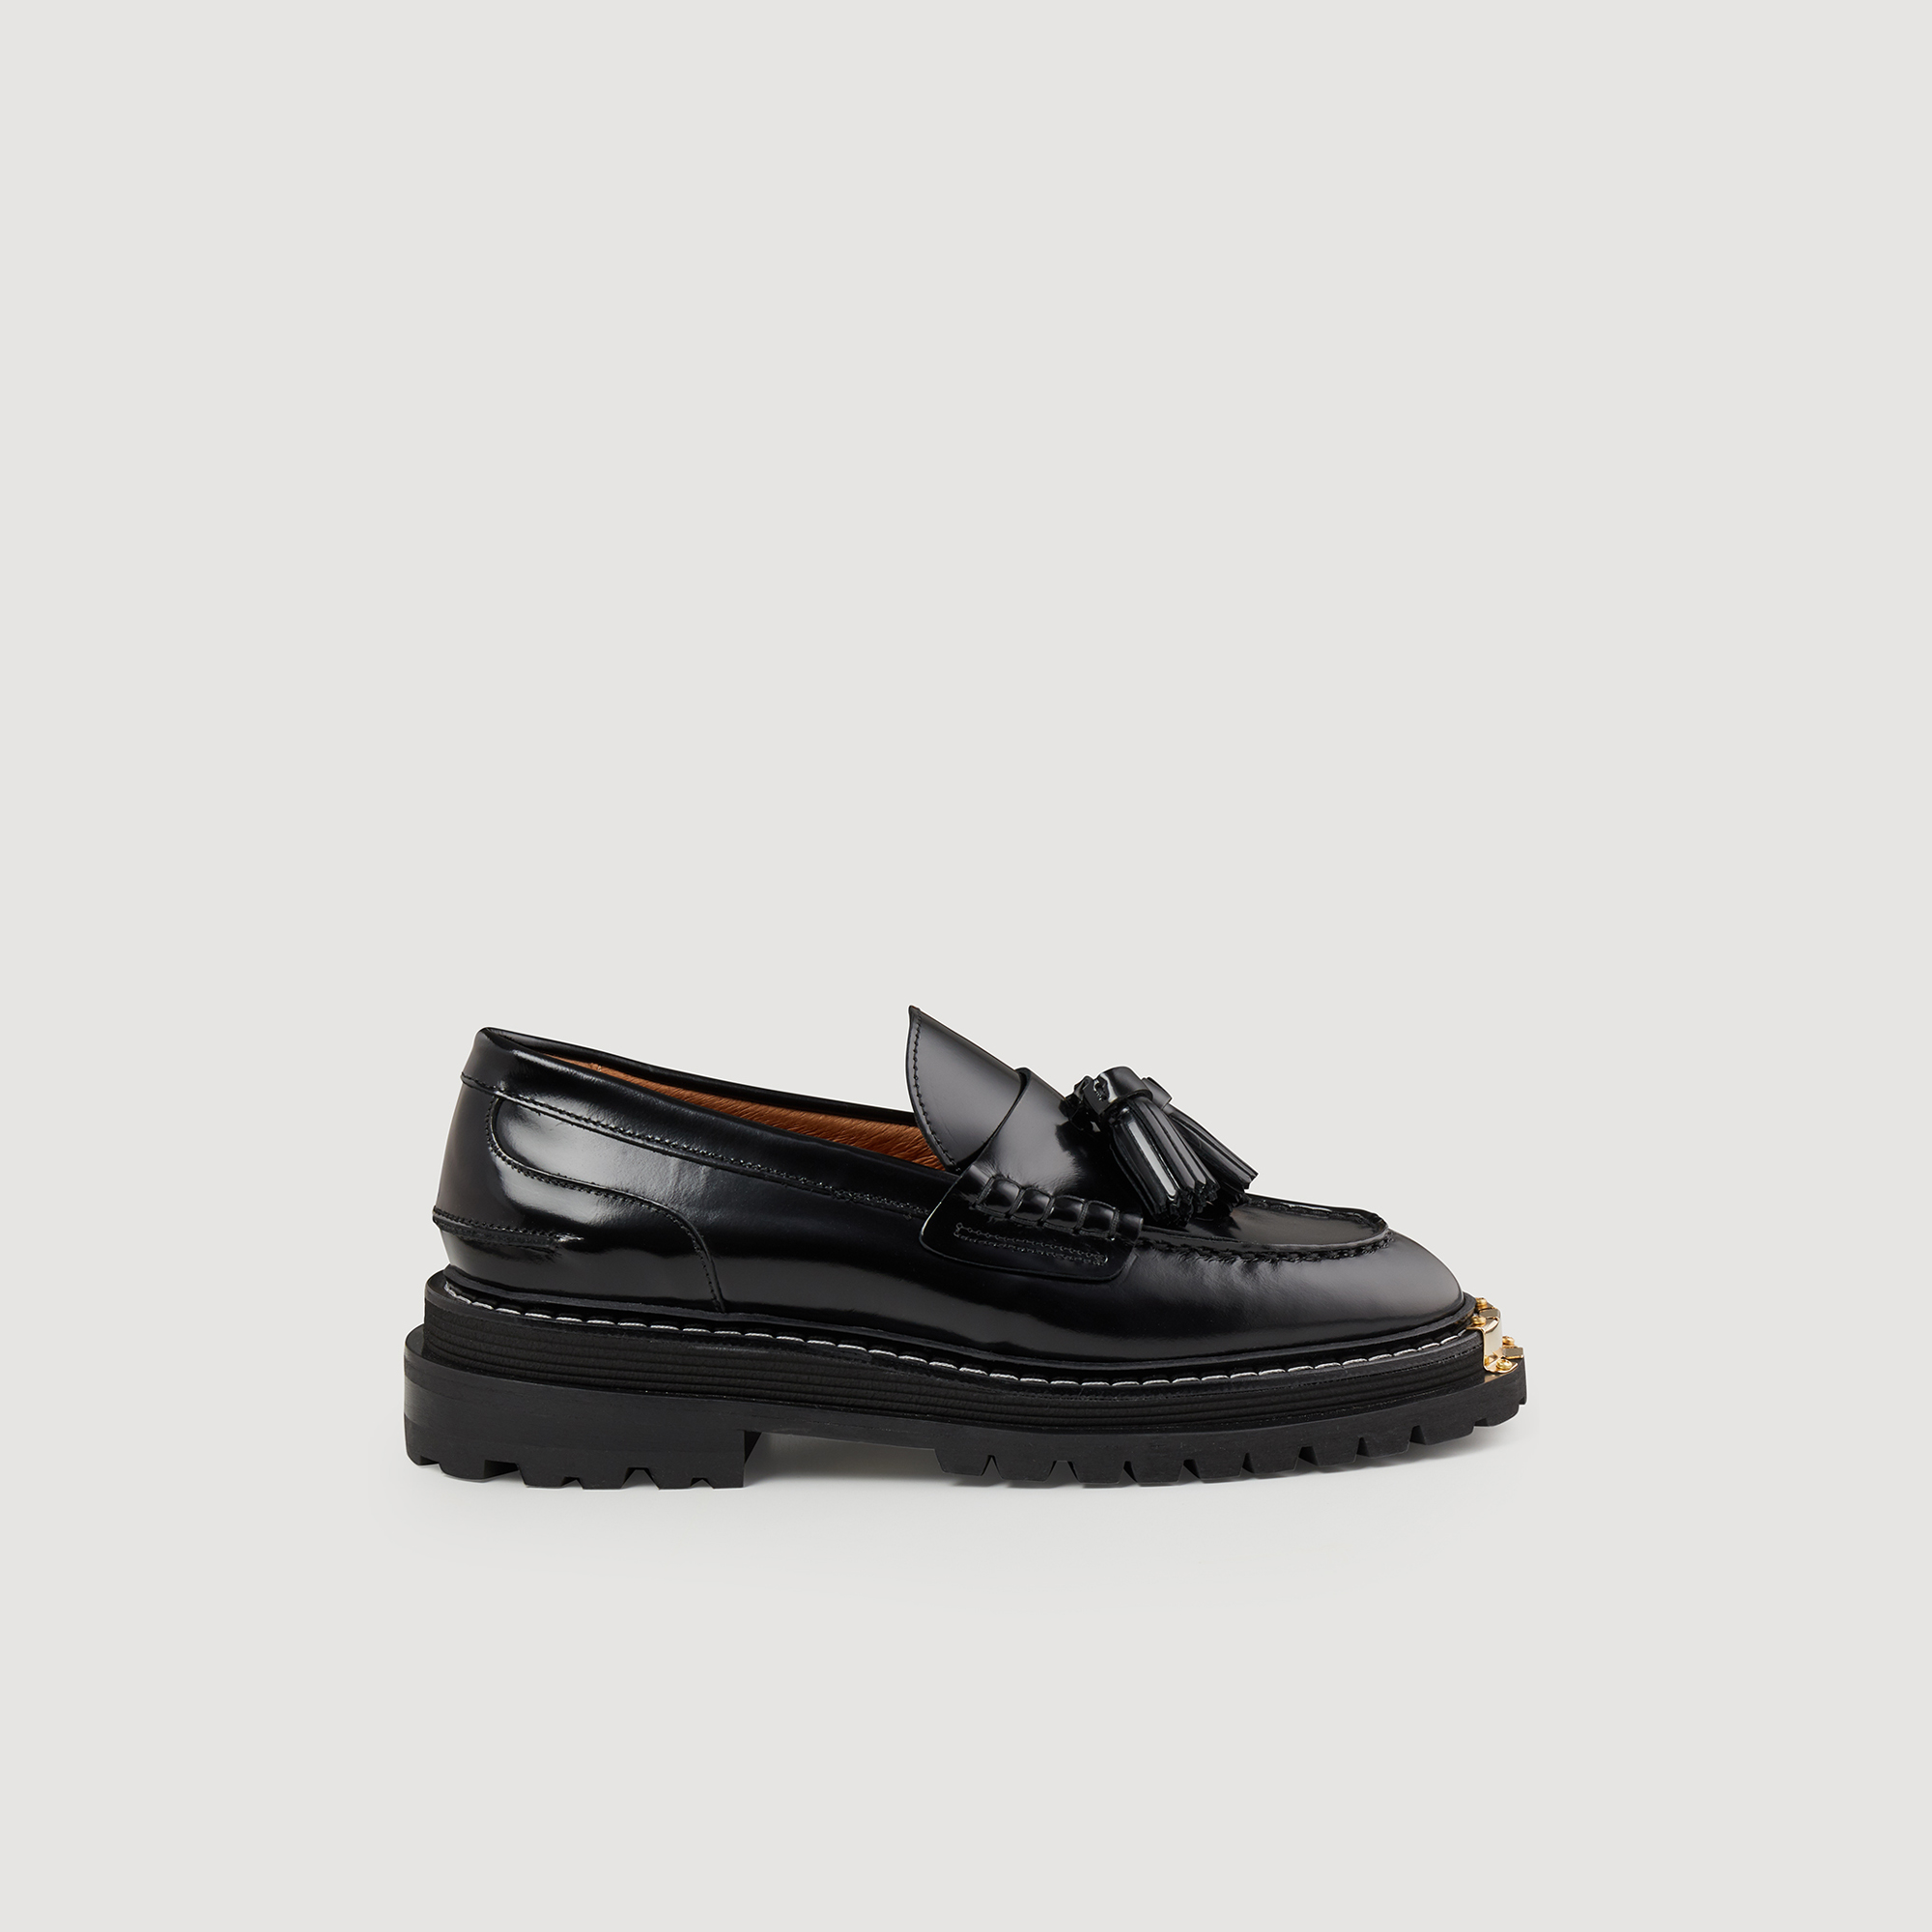 Sandro rubber Thick-soled leather loafers